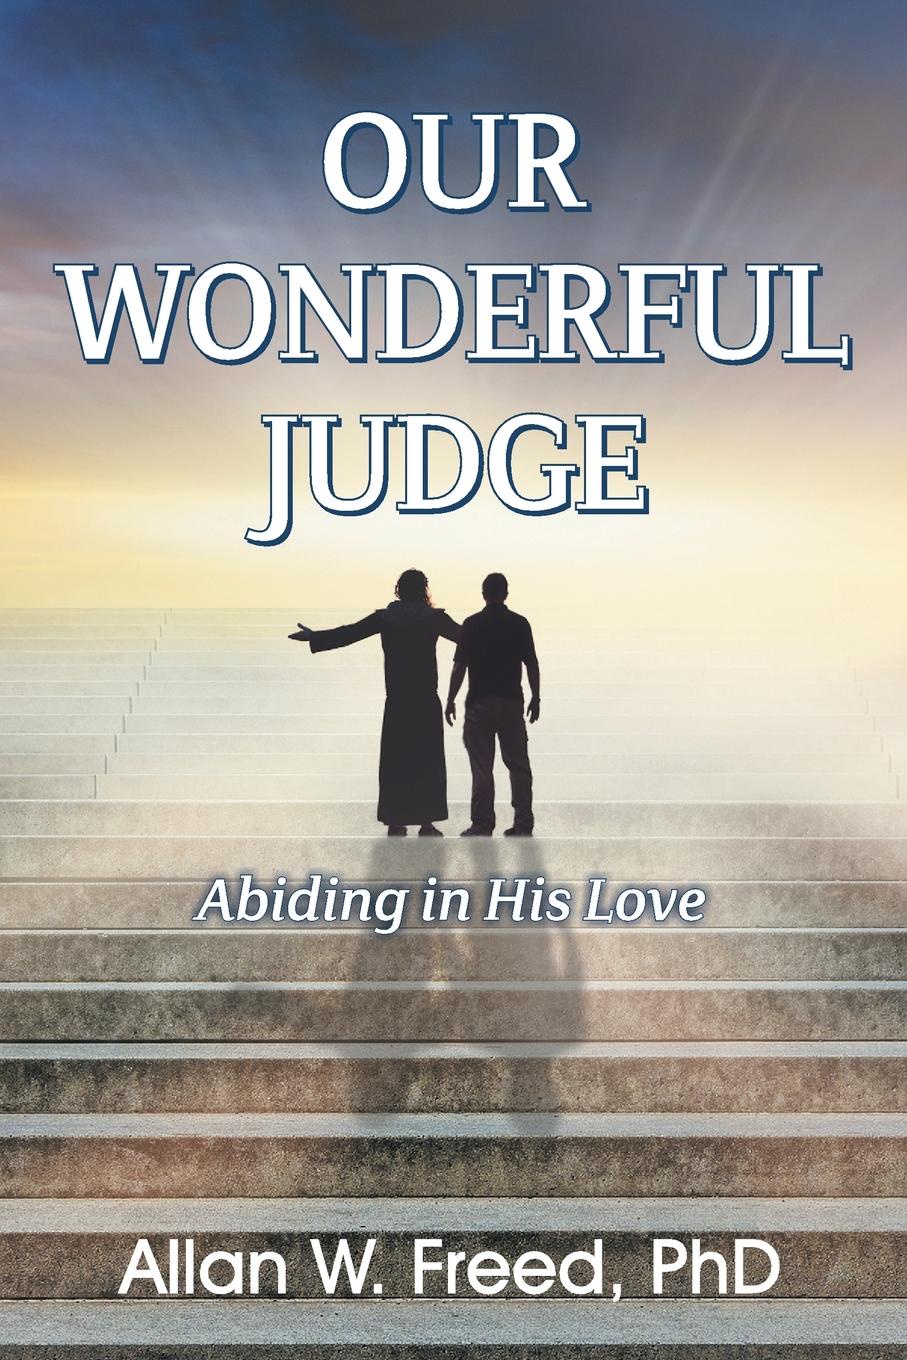 Our Wonderful Judge. Abiding in His Love